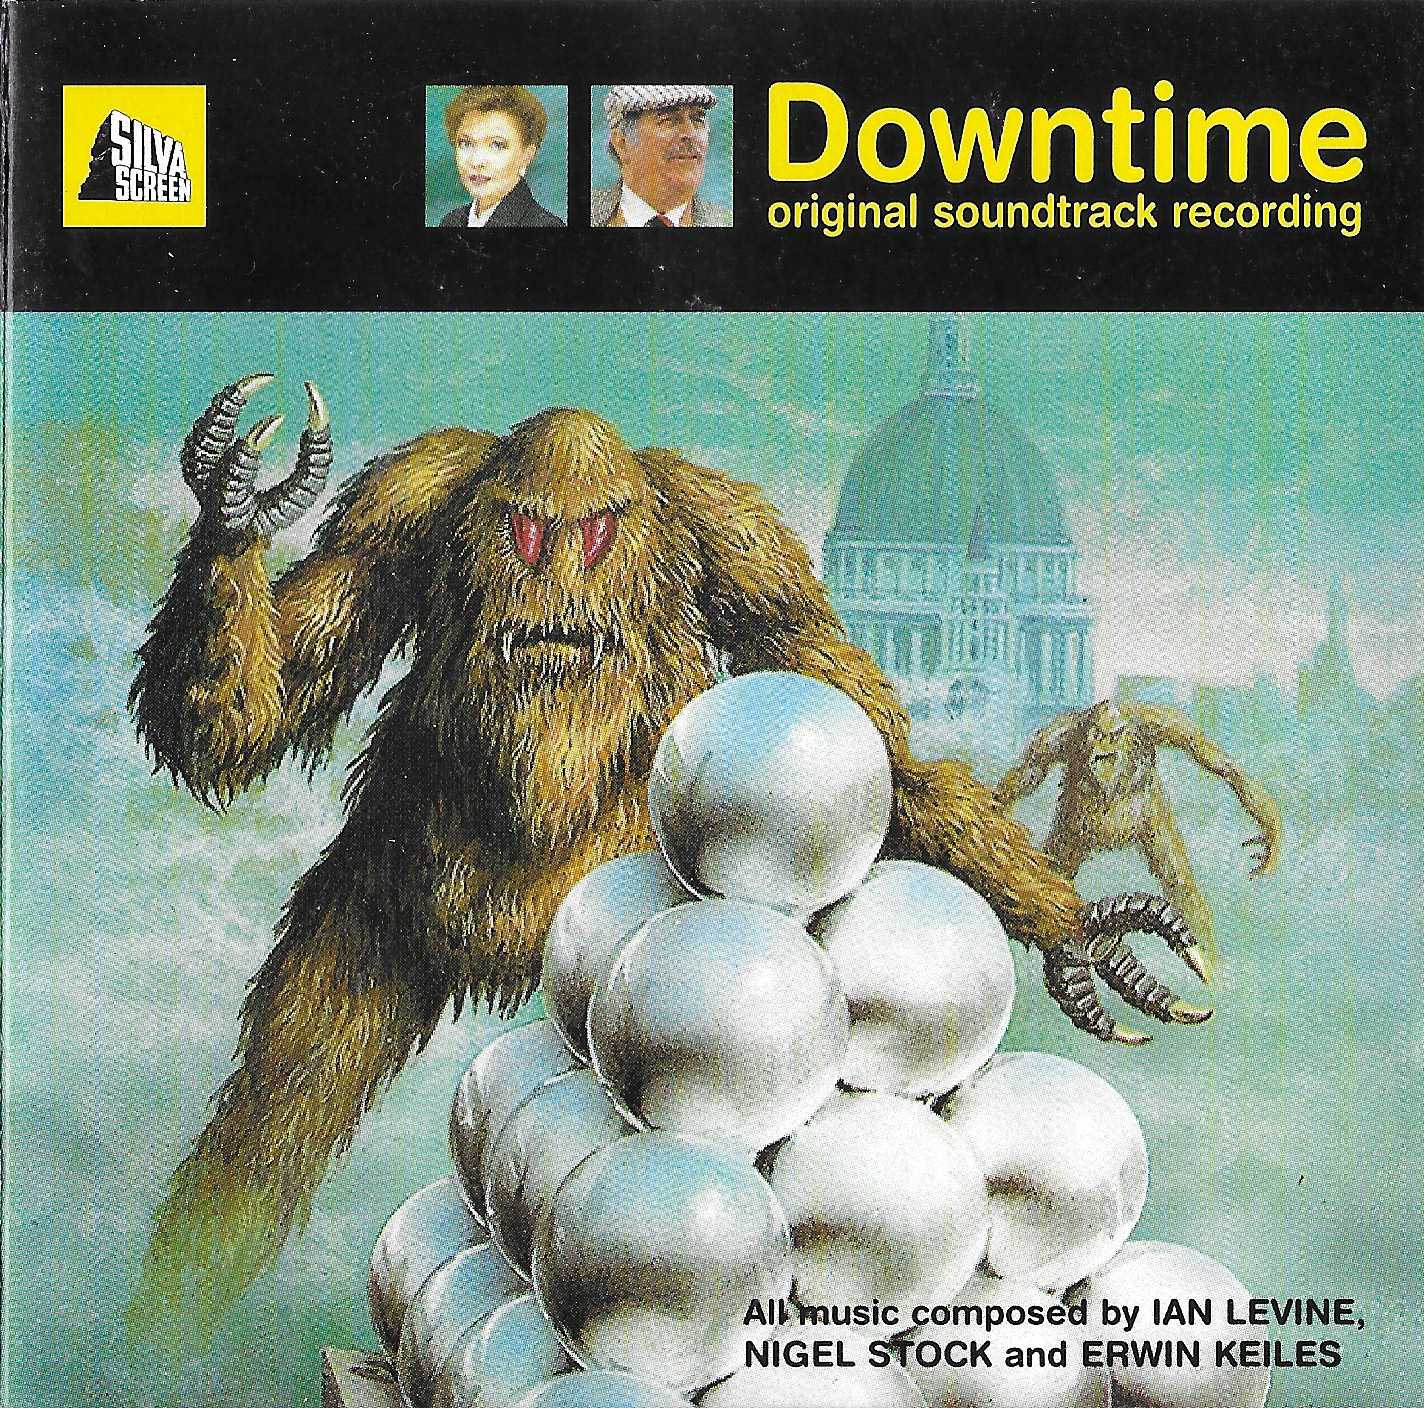 Picture of Downtime by artist Ian Levine / Nigel Stock / Erwin Keiles from the BBC cds - Records and Tapes library